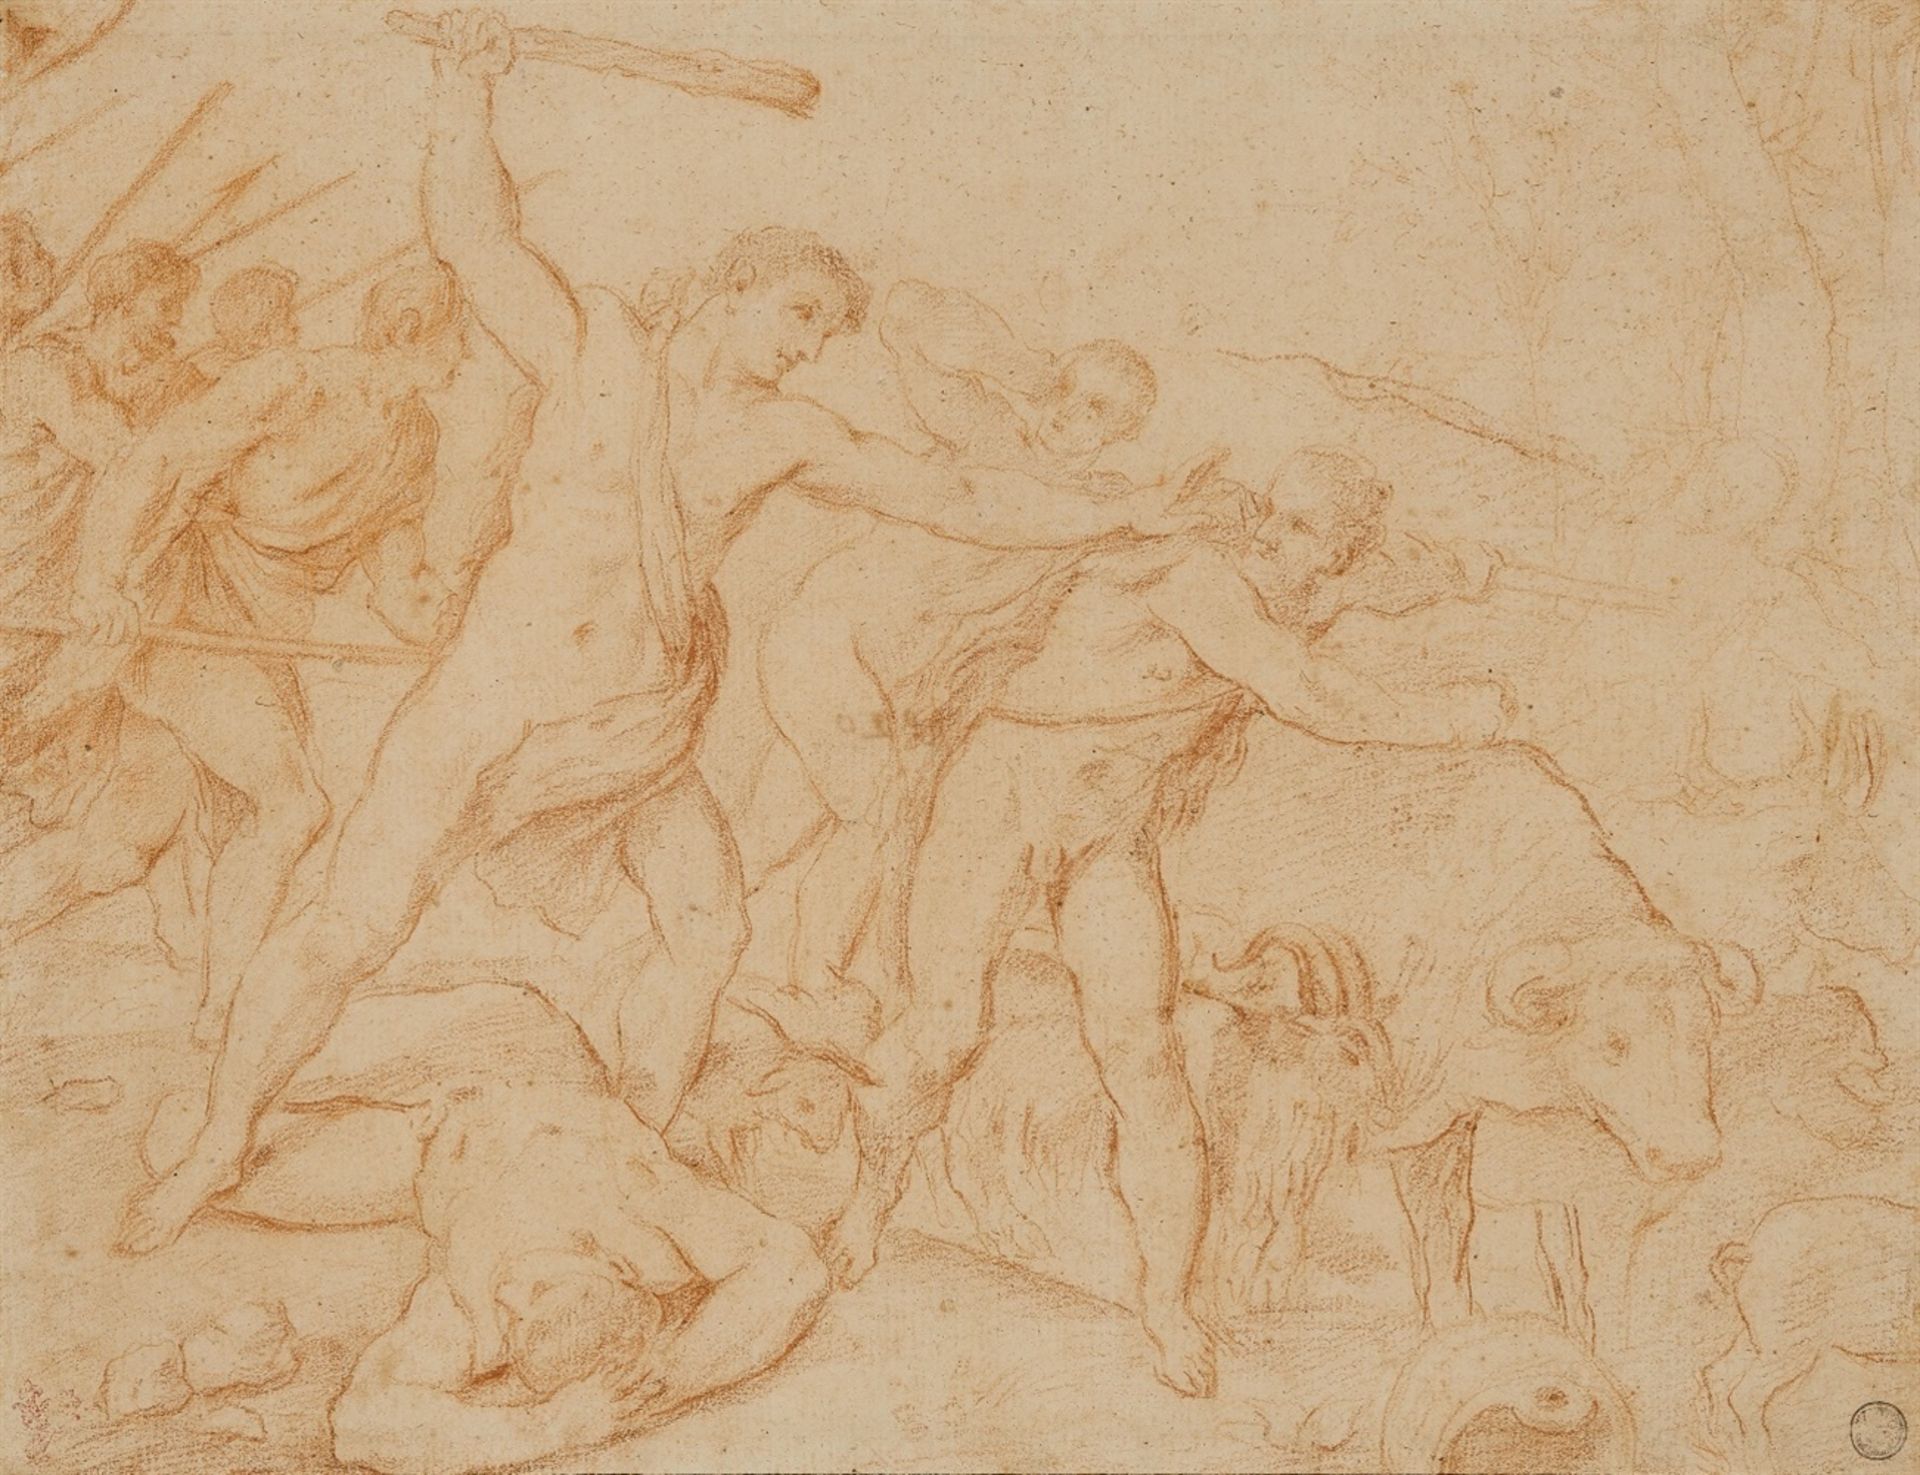 Giuseppe Maria Crespi, circle ofRomulus and Remus battling the Cattle ThievesRed chalk on paper (